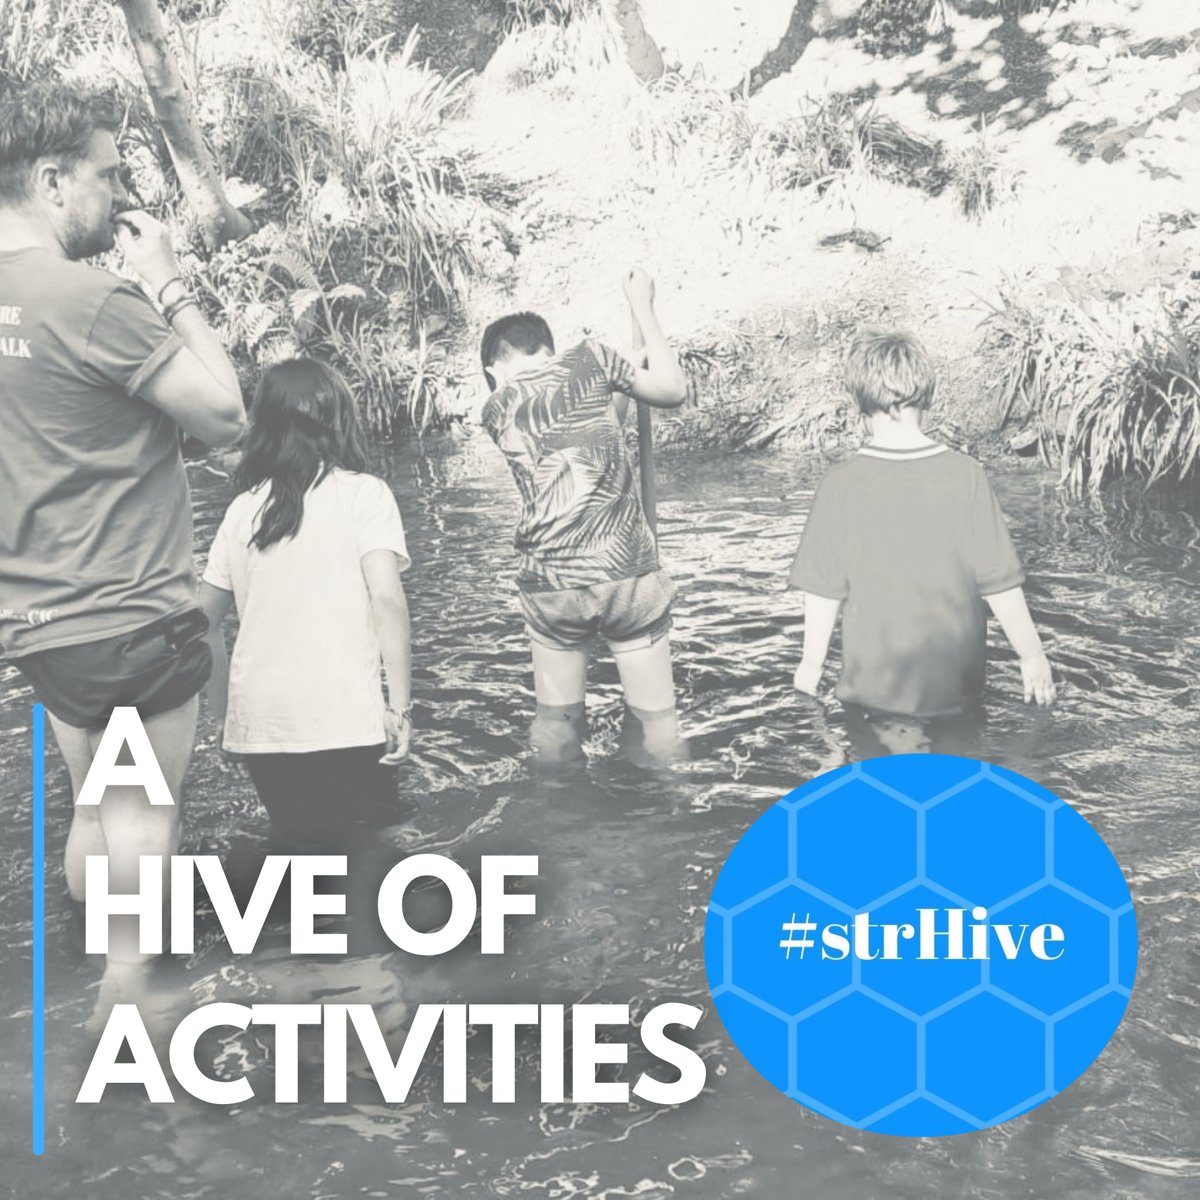 At StrHive we introduce clients to the benefits of an active, altruistic and outdoor lifestyle, alongside group events within our ‘hive' Saltburn Community & Arts Association.
Supporting the community ✨
#strhive #community #teesside #outdooractivities #active #holistic #family